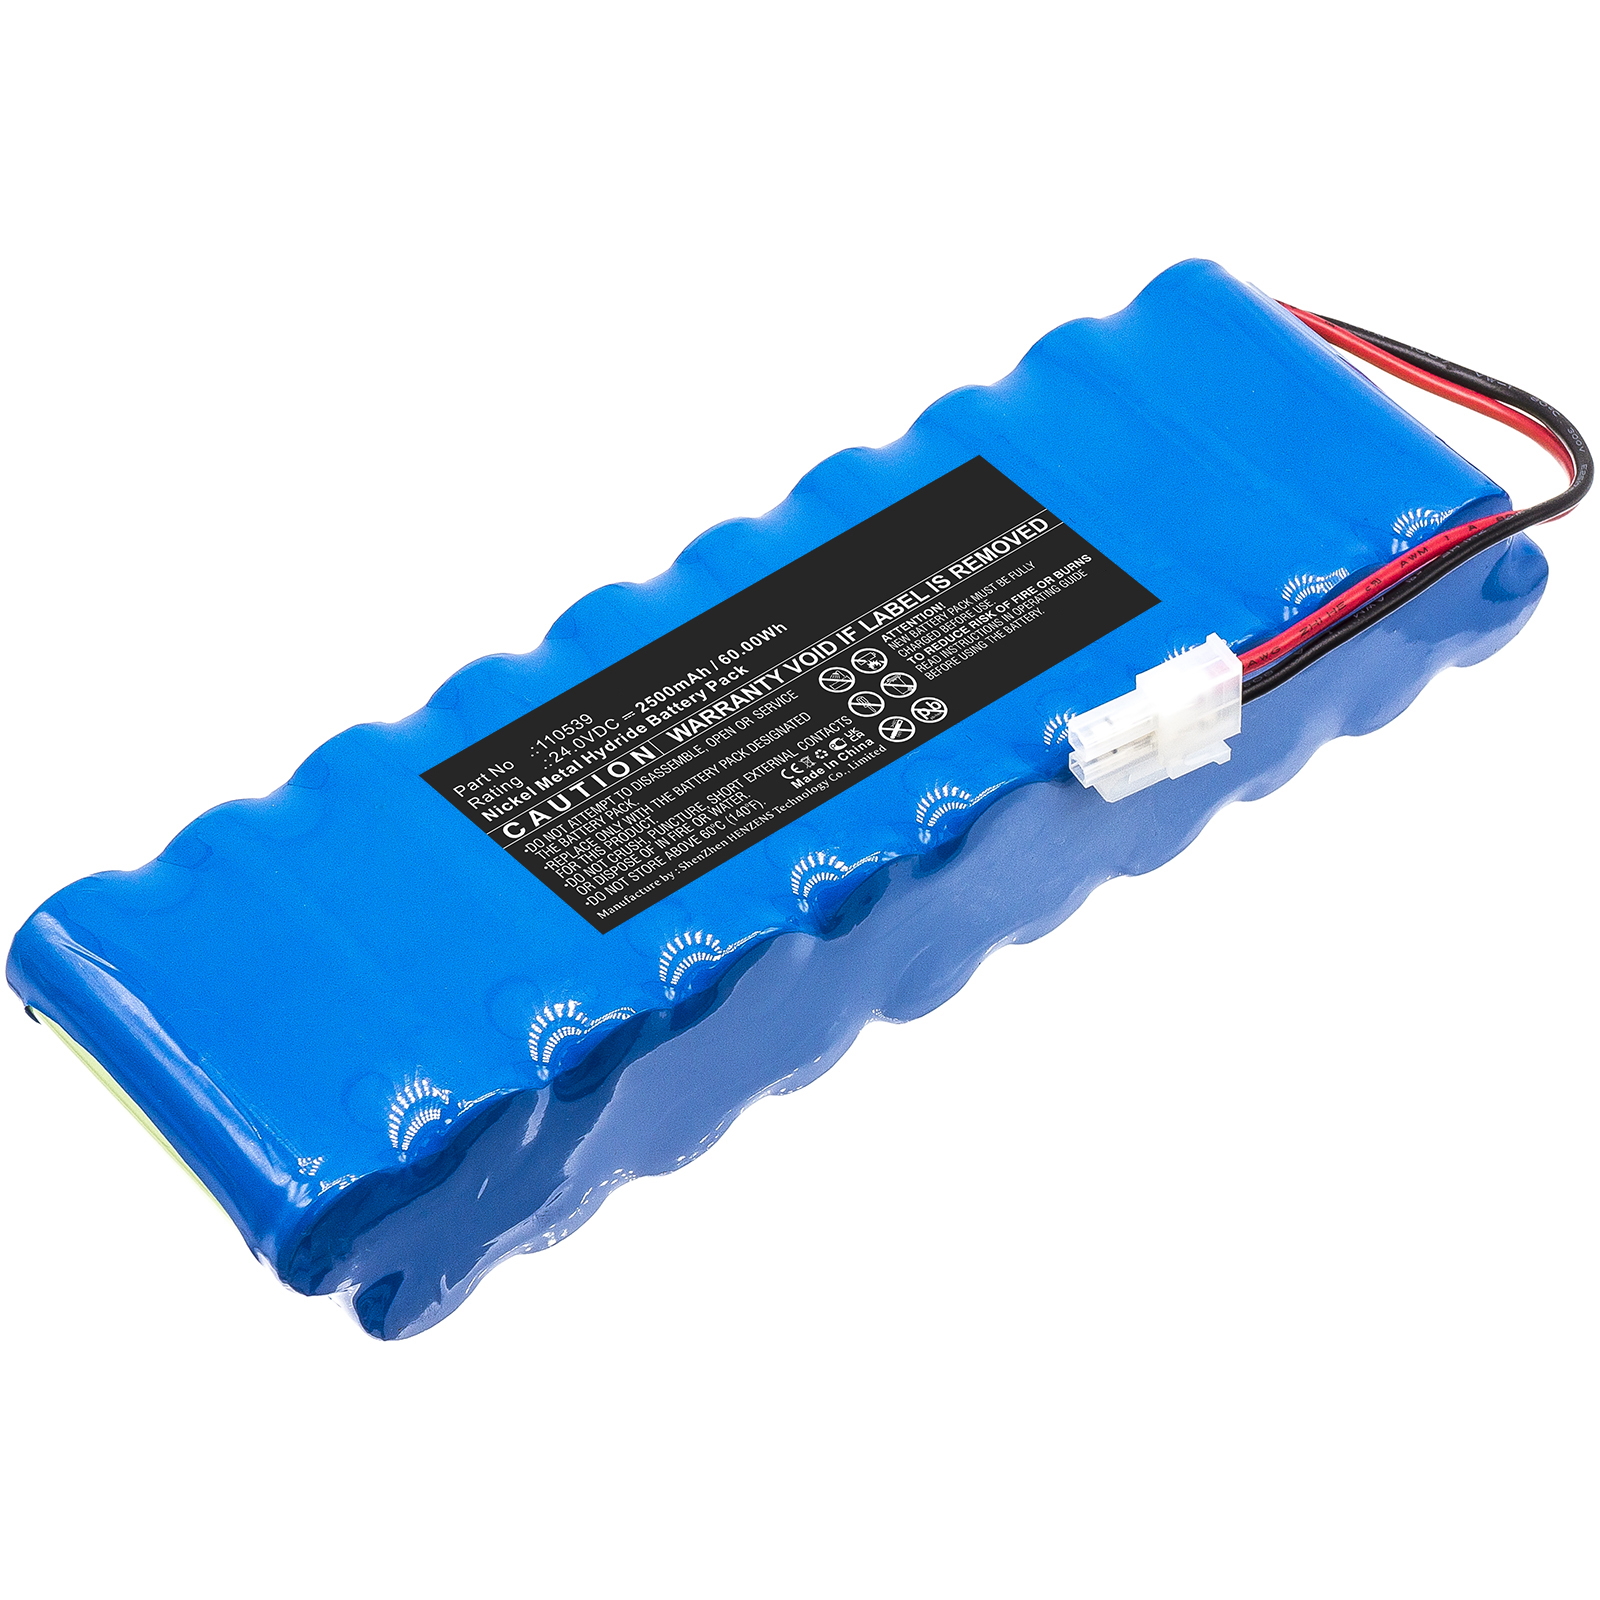 Synergy Digital Medical Battery, Compatible with HillRom 110539 Medical Battery (Ni-MH, 24V, 2500mAh)